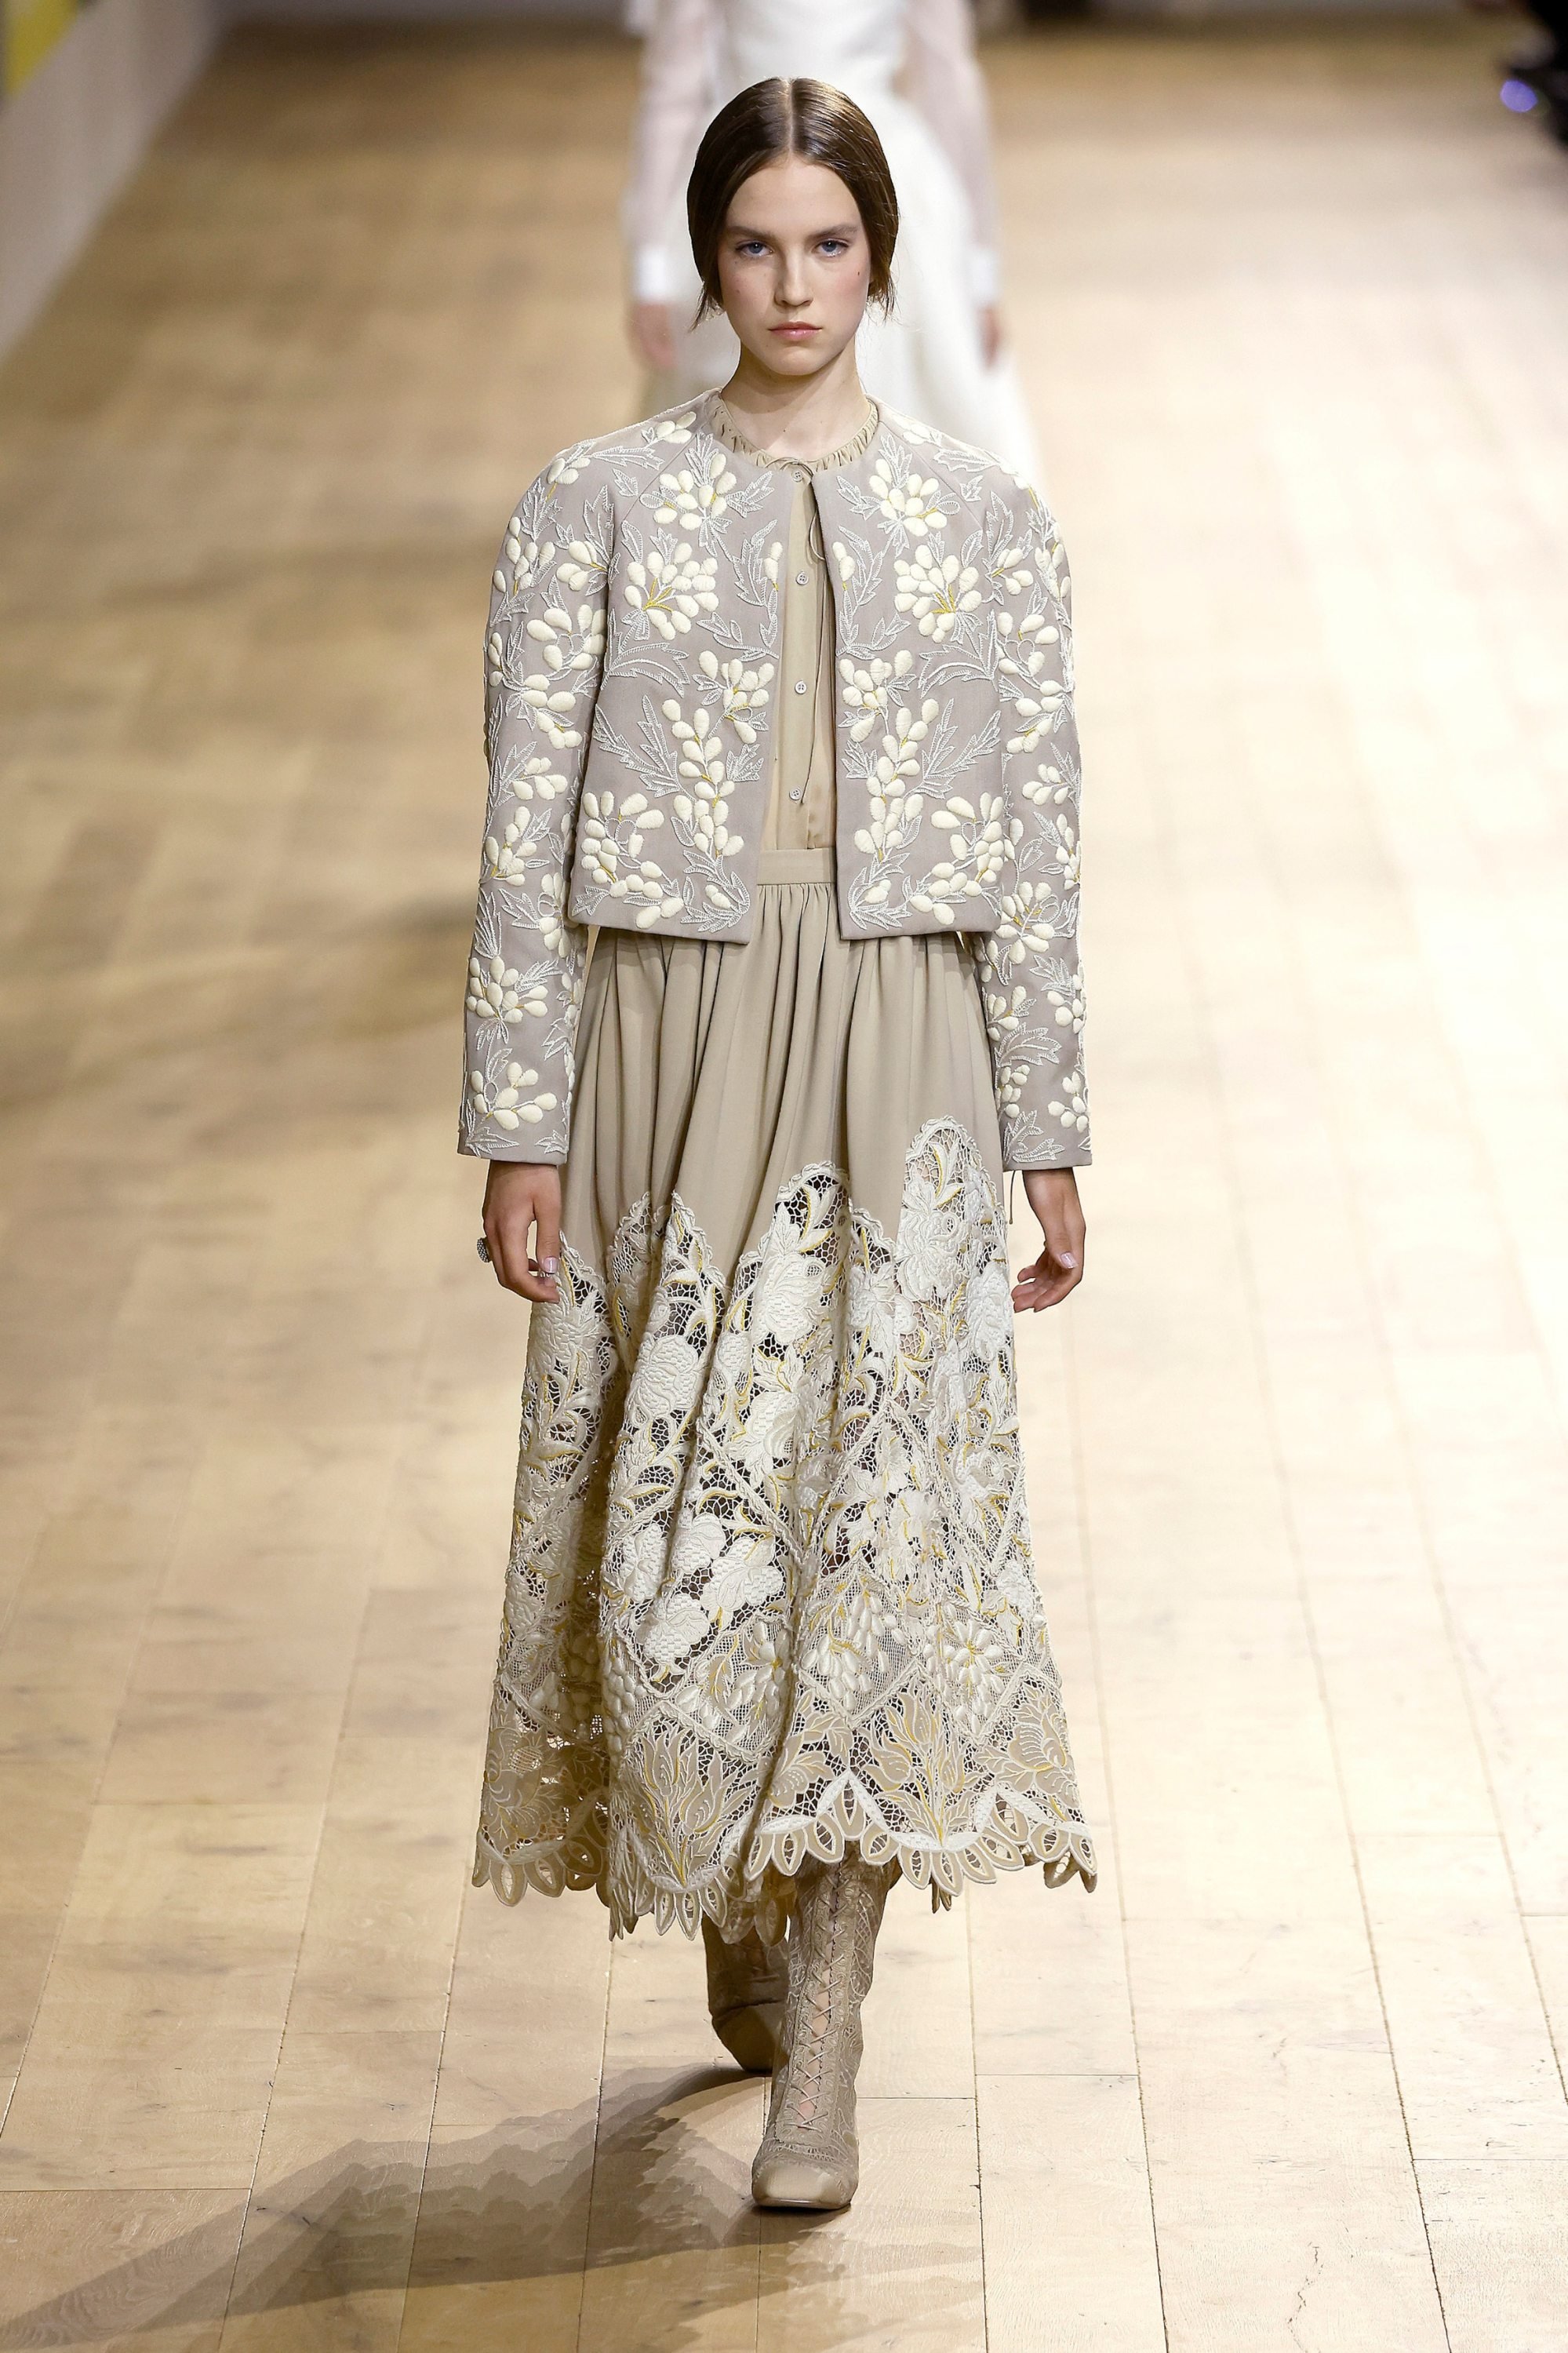 Paris Haute Couture Week: Dior paid homage to Ukraine with an ...